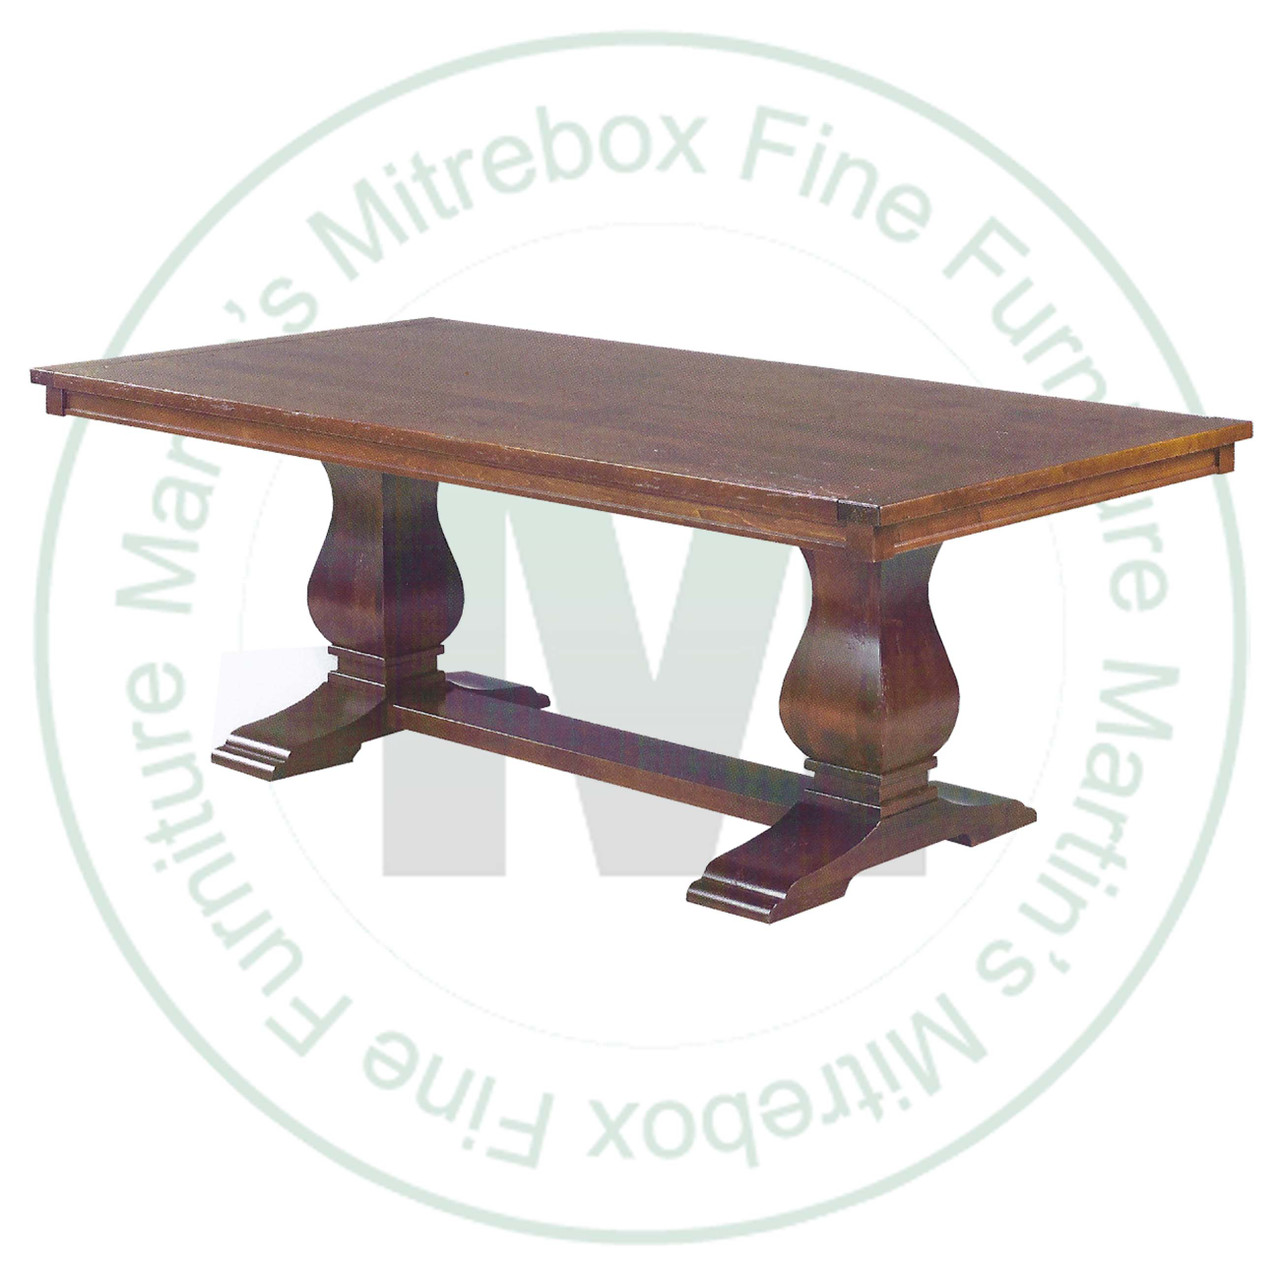 Oak Socrates Solid Top Pedestal Table 42''D x 108''W x 30''H And 2 - 16'' Extensions. Table Has 1.25'' Thick Top